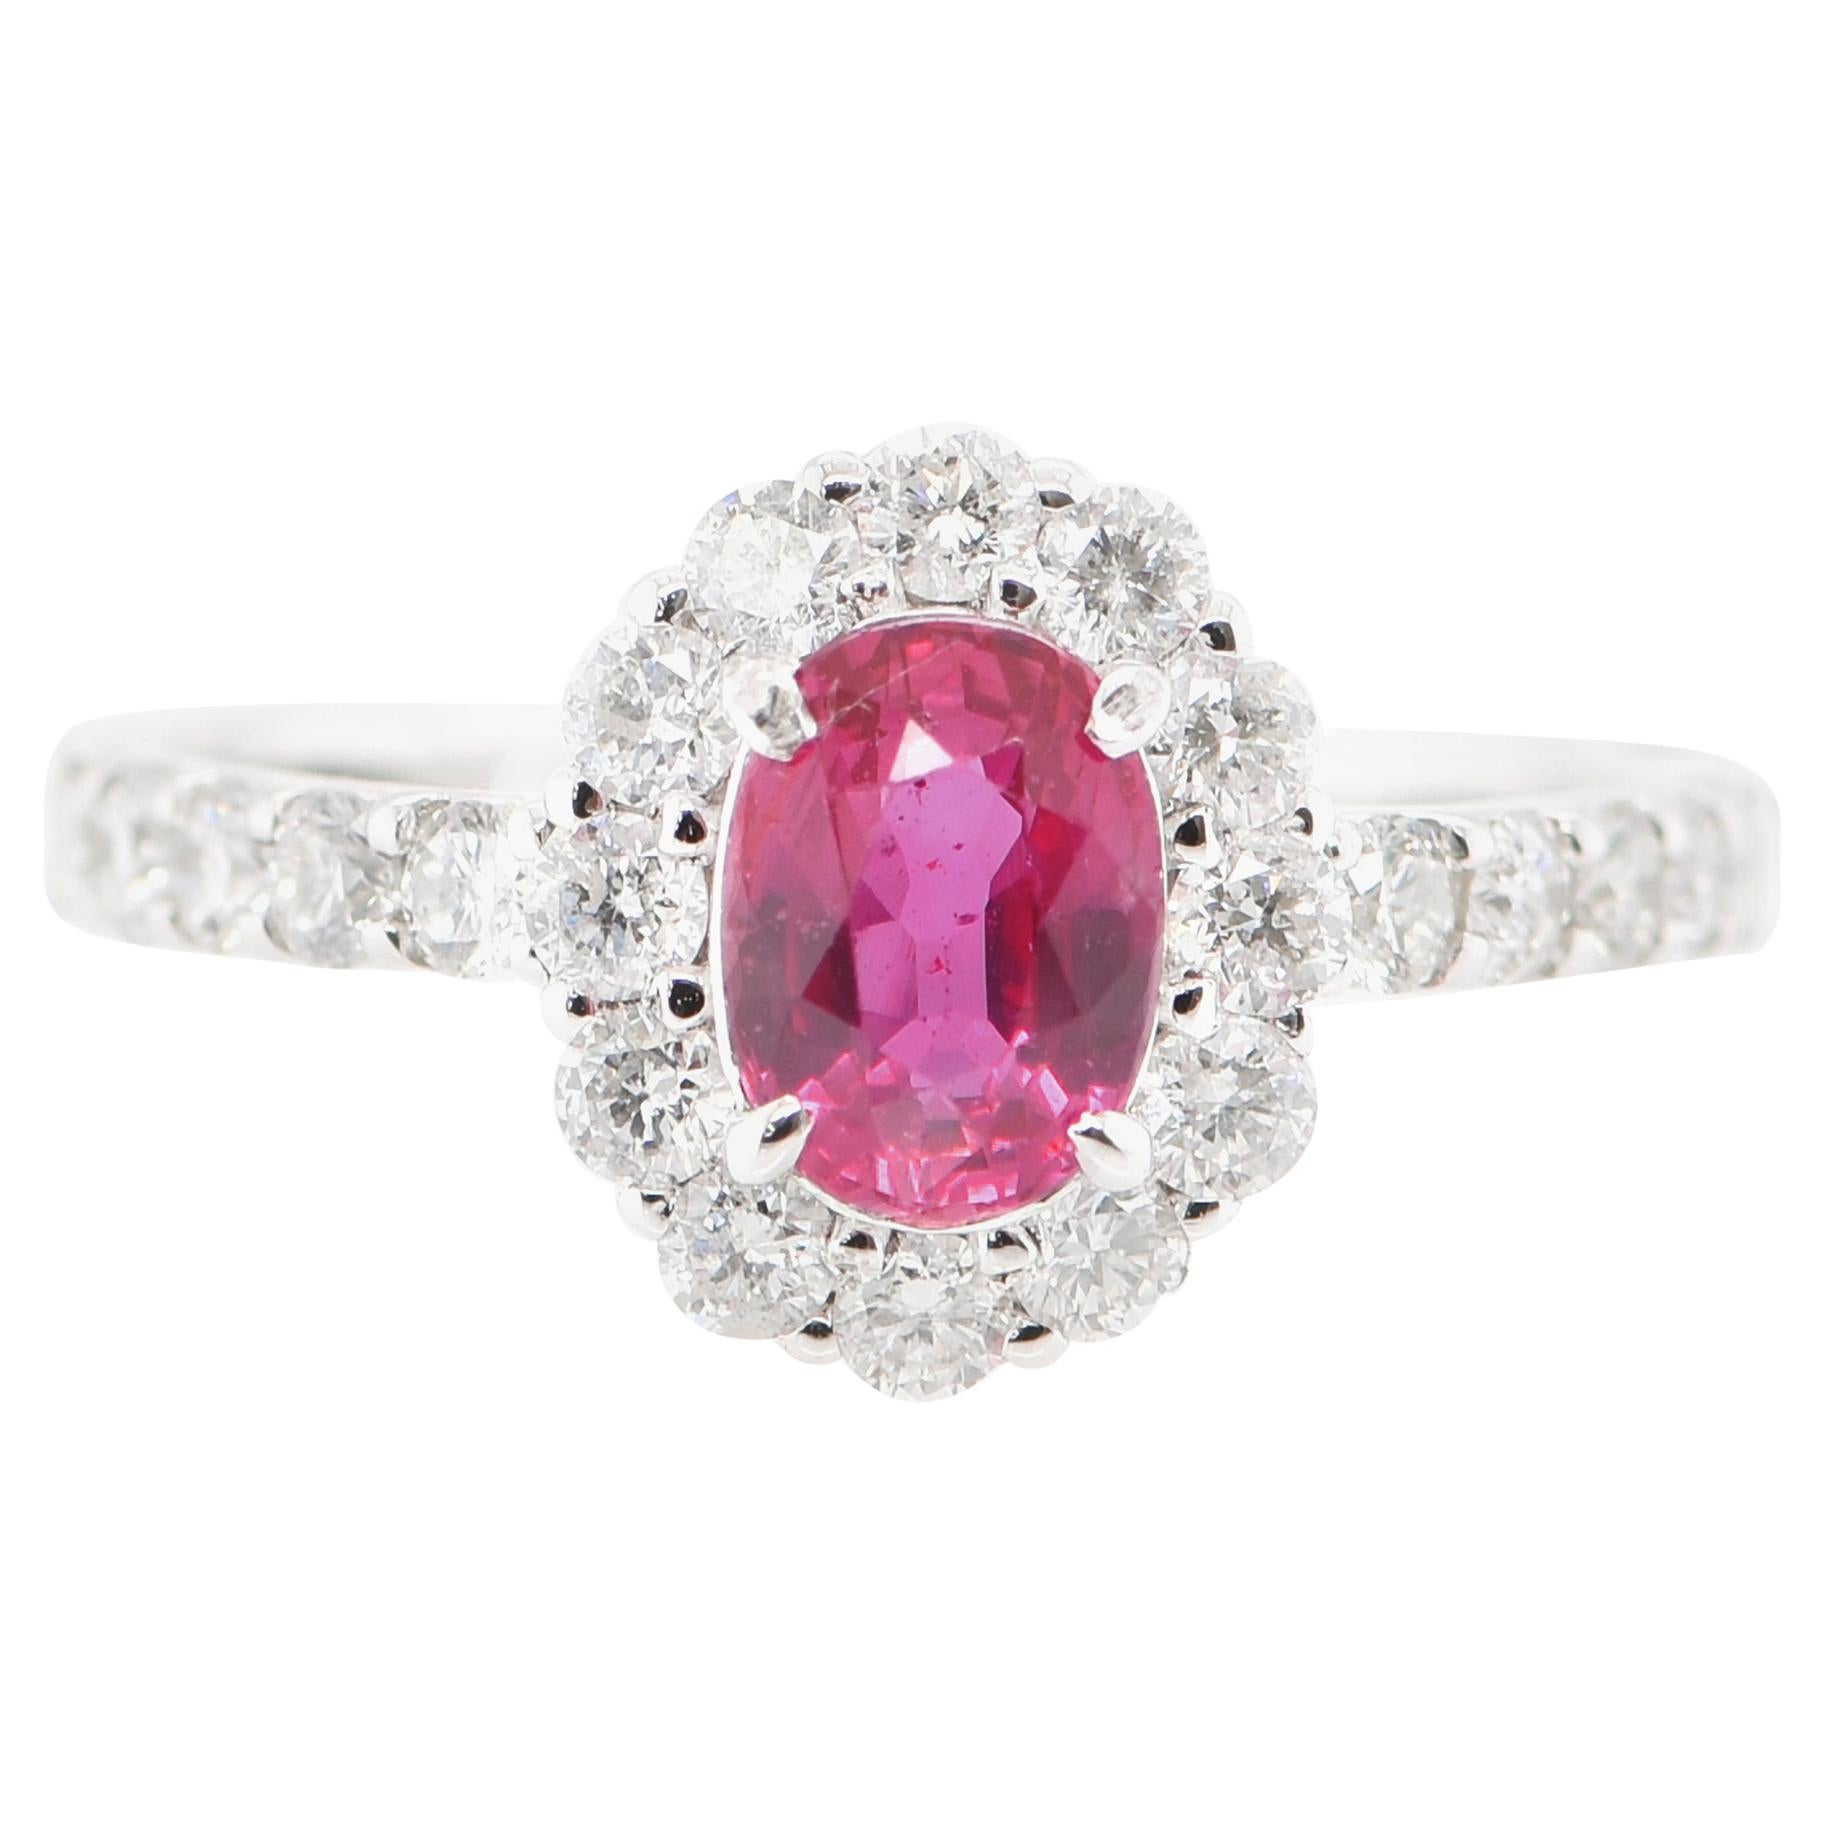 1.07 Carat Natural Untreated 'No Heat' Ruby and Diamond Ring Set in Platinum